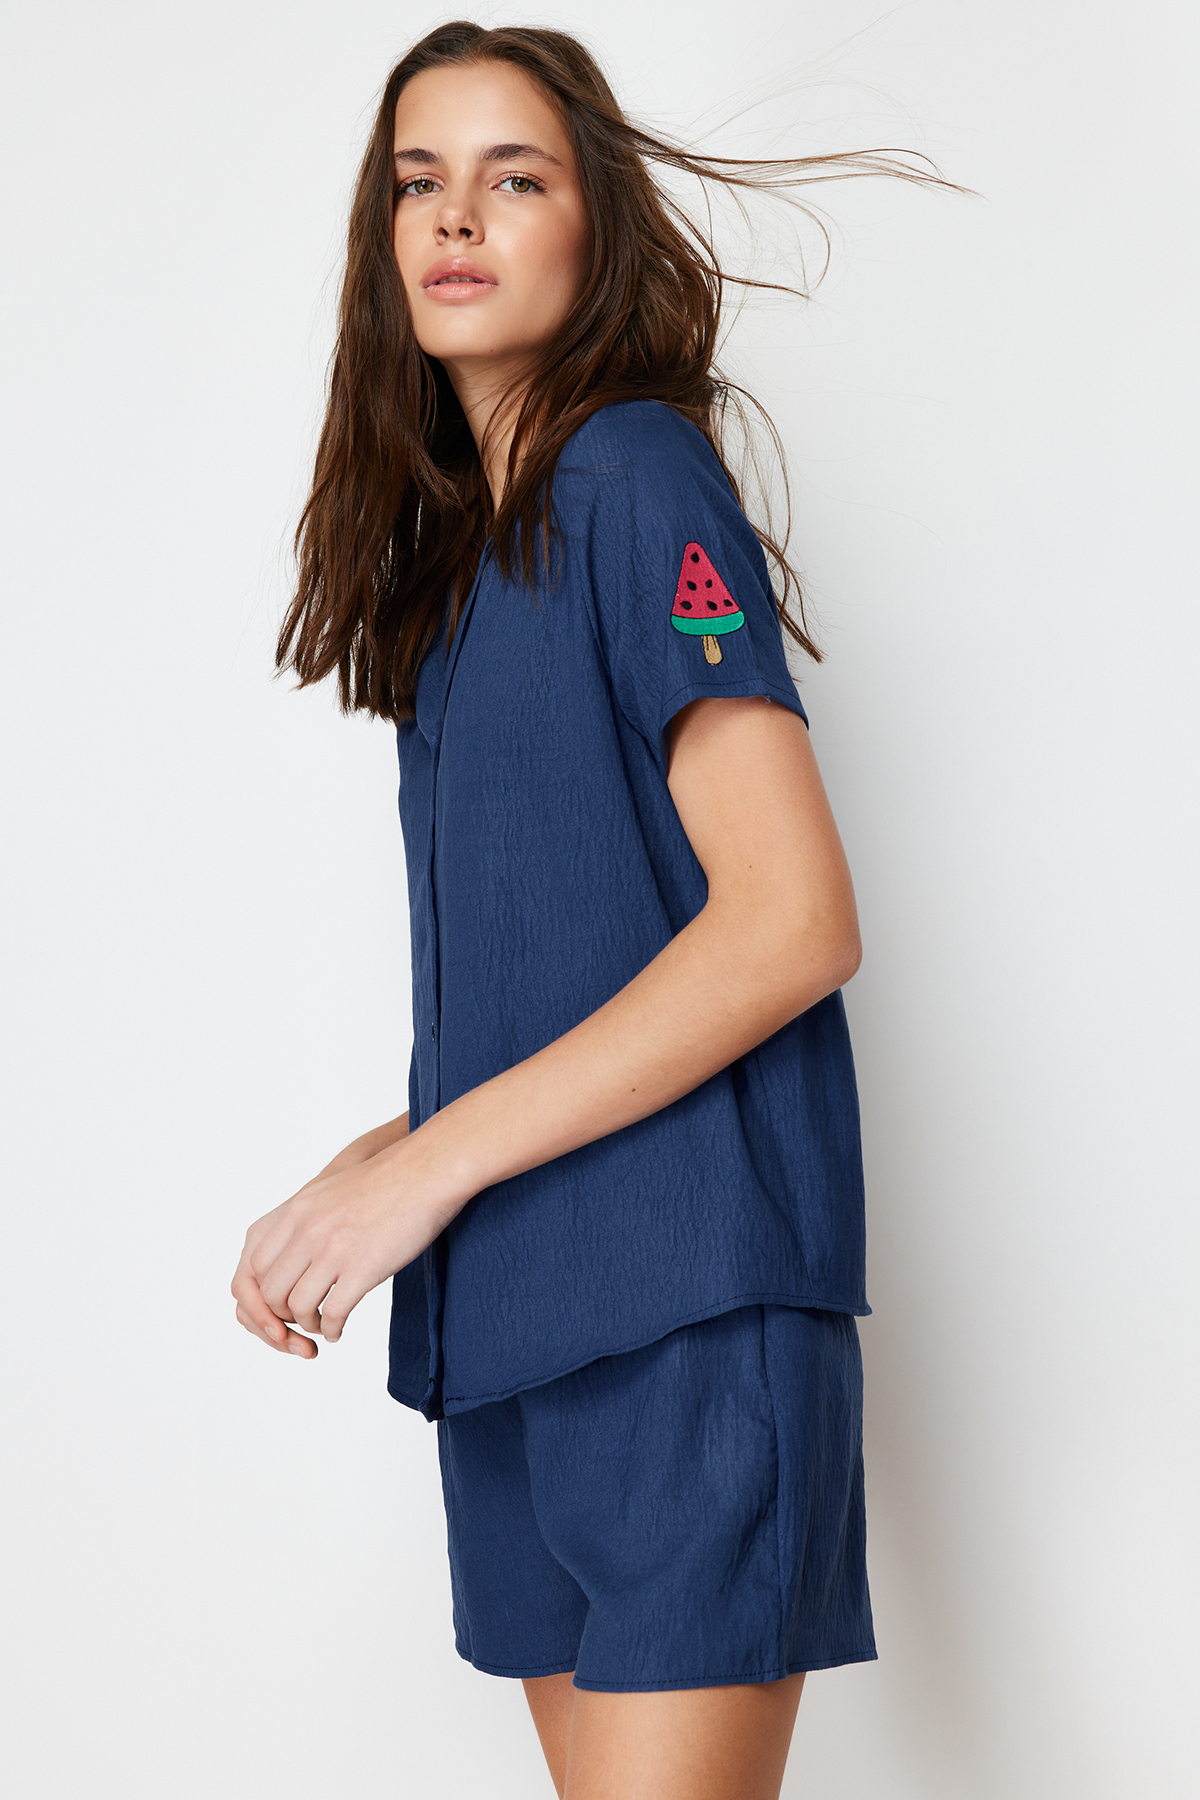 Trendyol Navy Blue Watermelon Embroidered Woven Pajamas Set